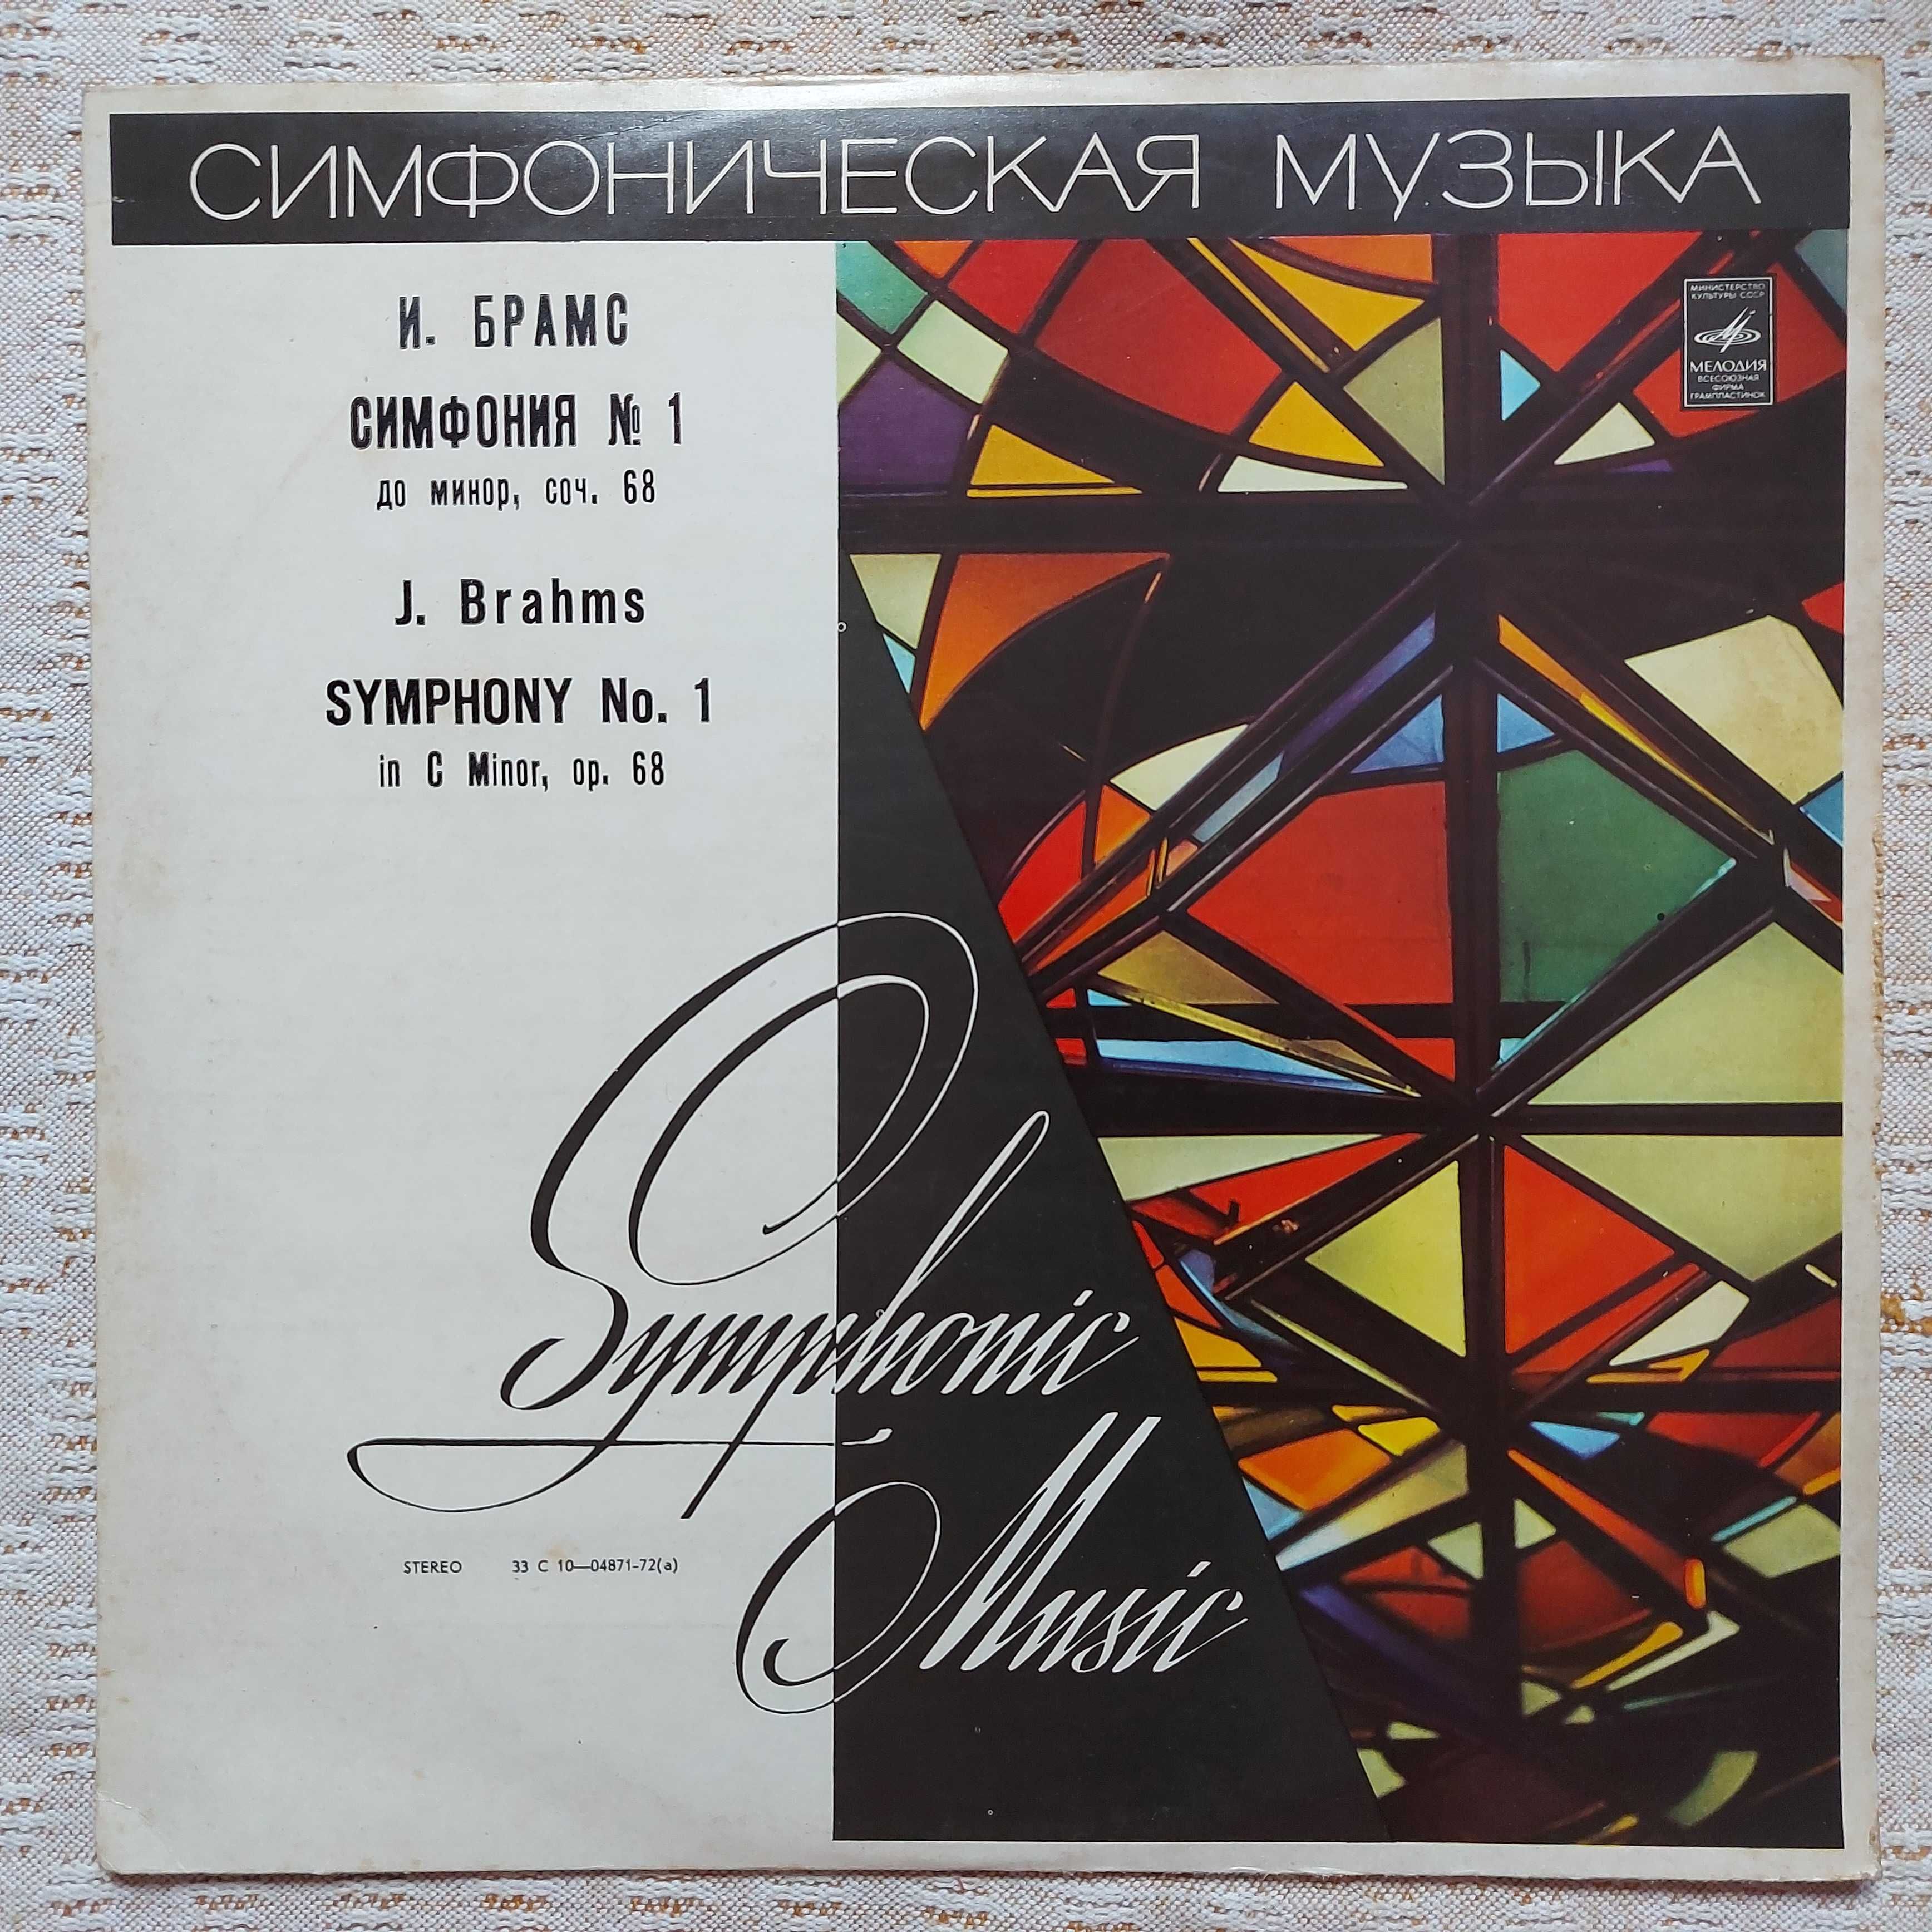 J. Brahms*, Great Symphony Orchestra Of Moscow Radio* Conductor Kirill